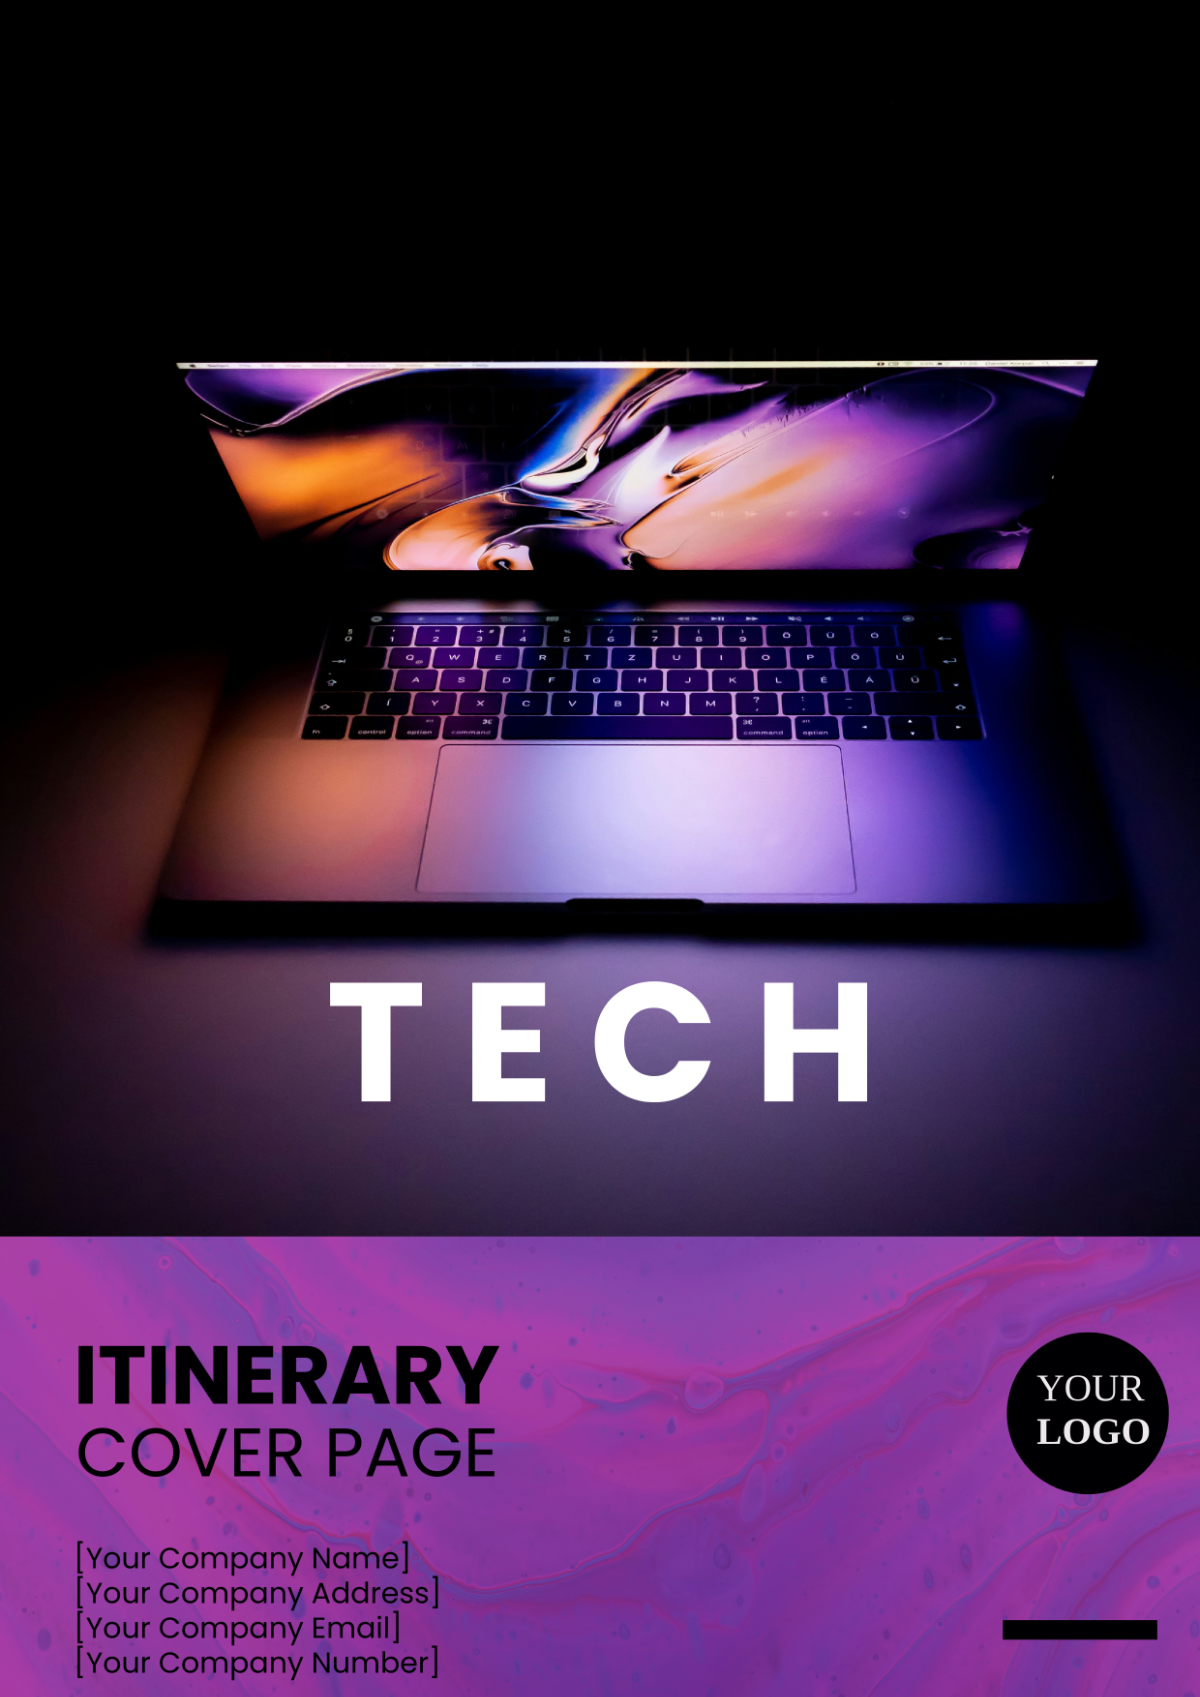 Tech Itinerary Cover Page